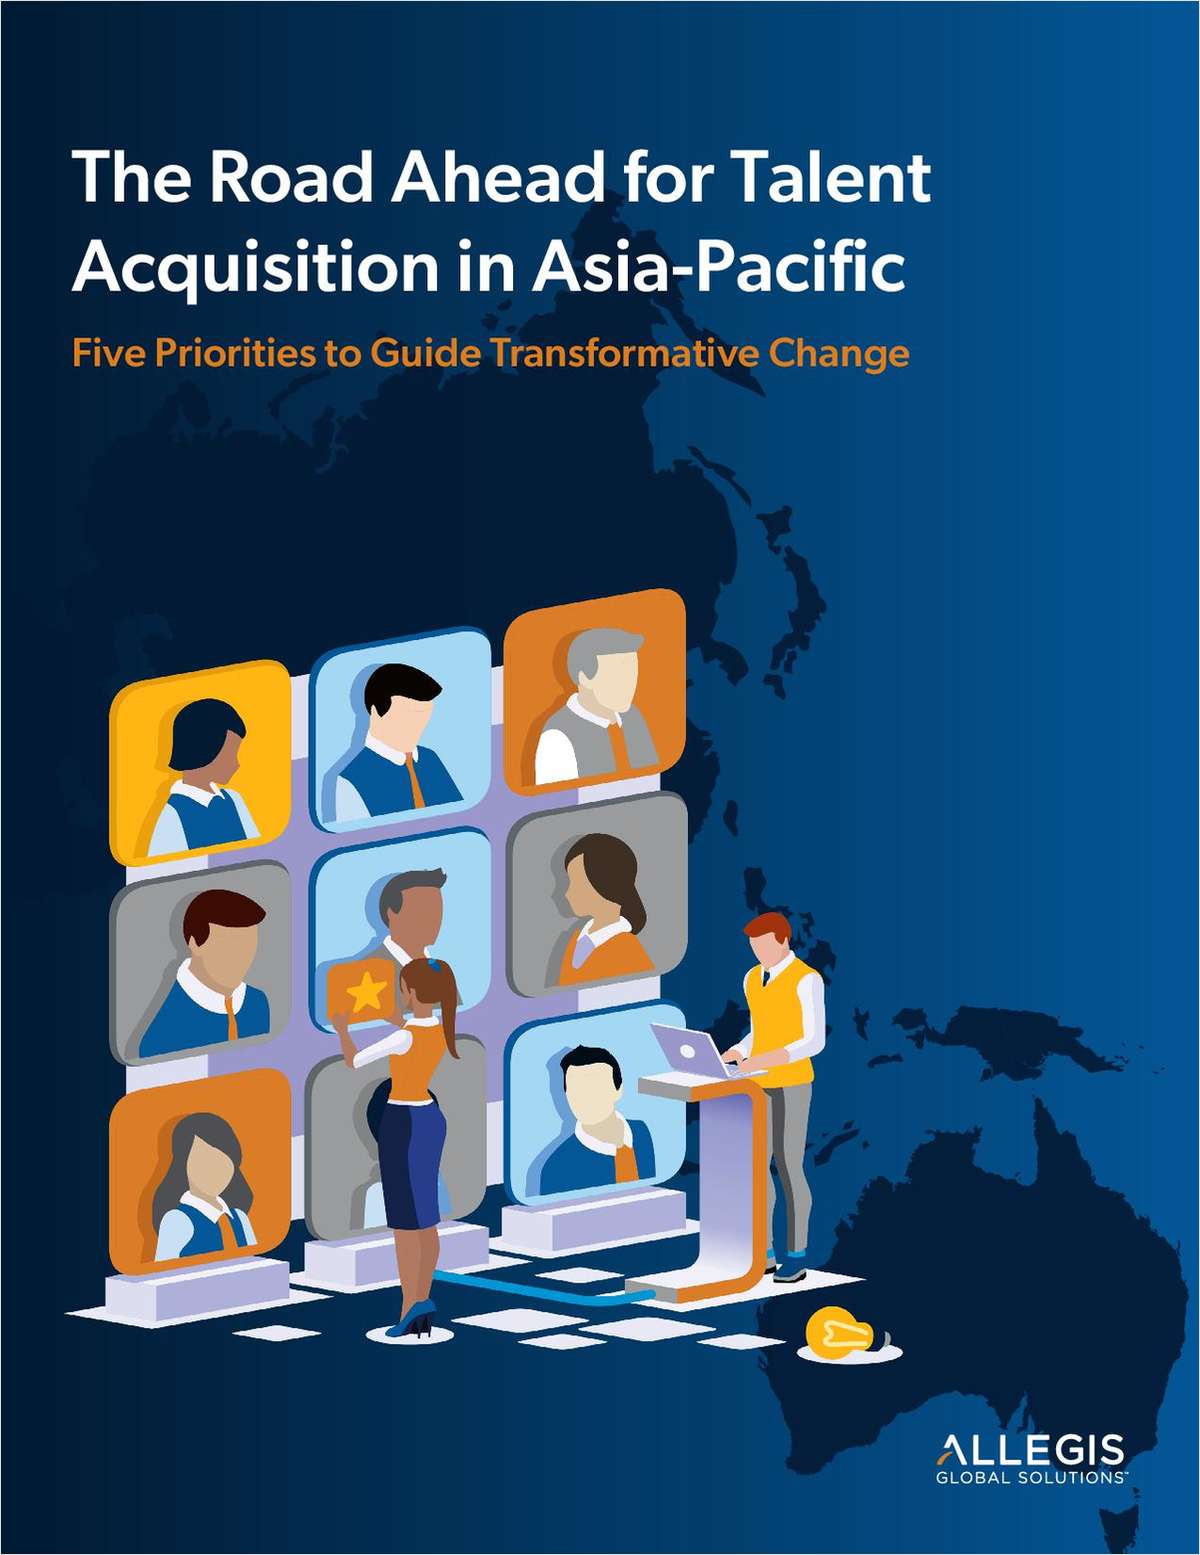 Talent Acquisition in APAC